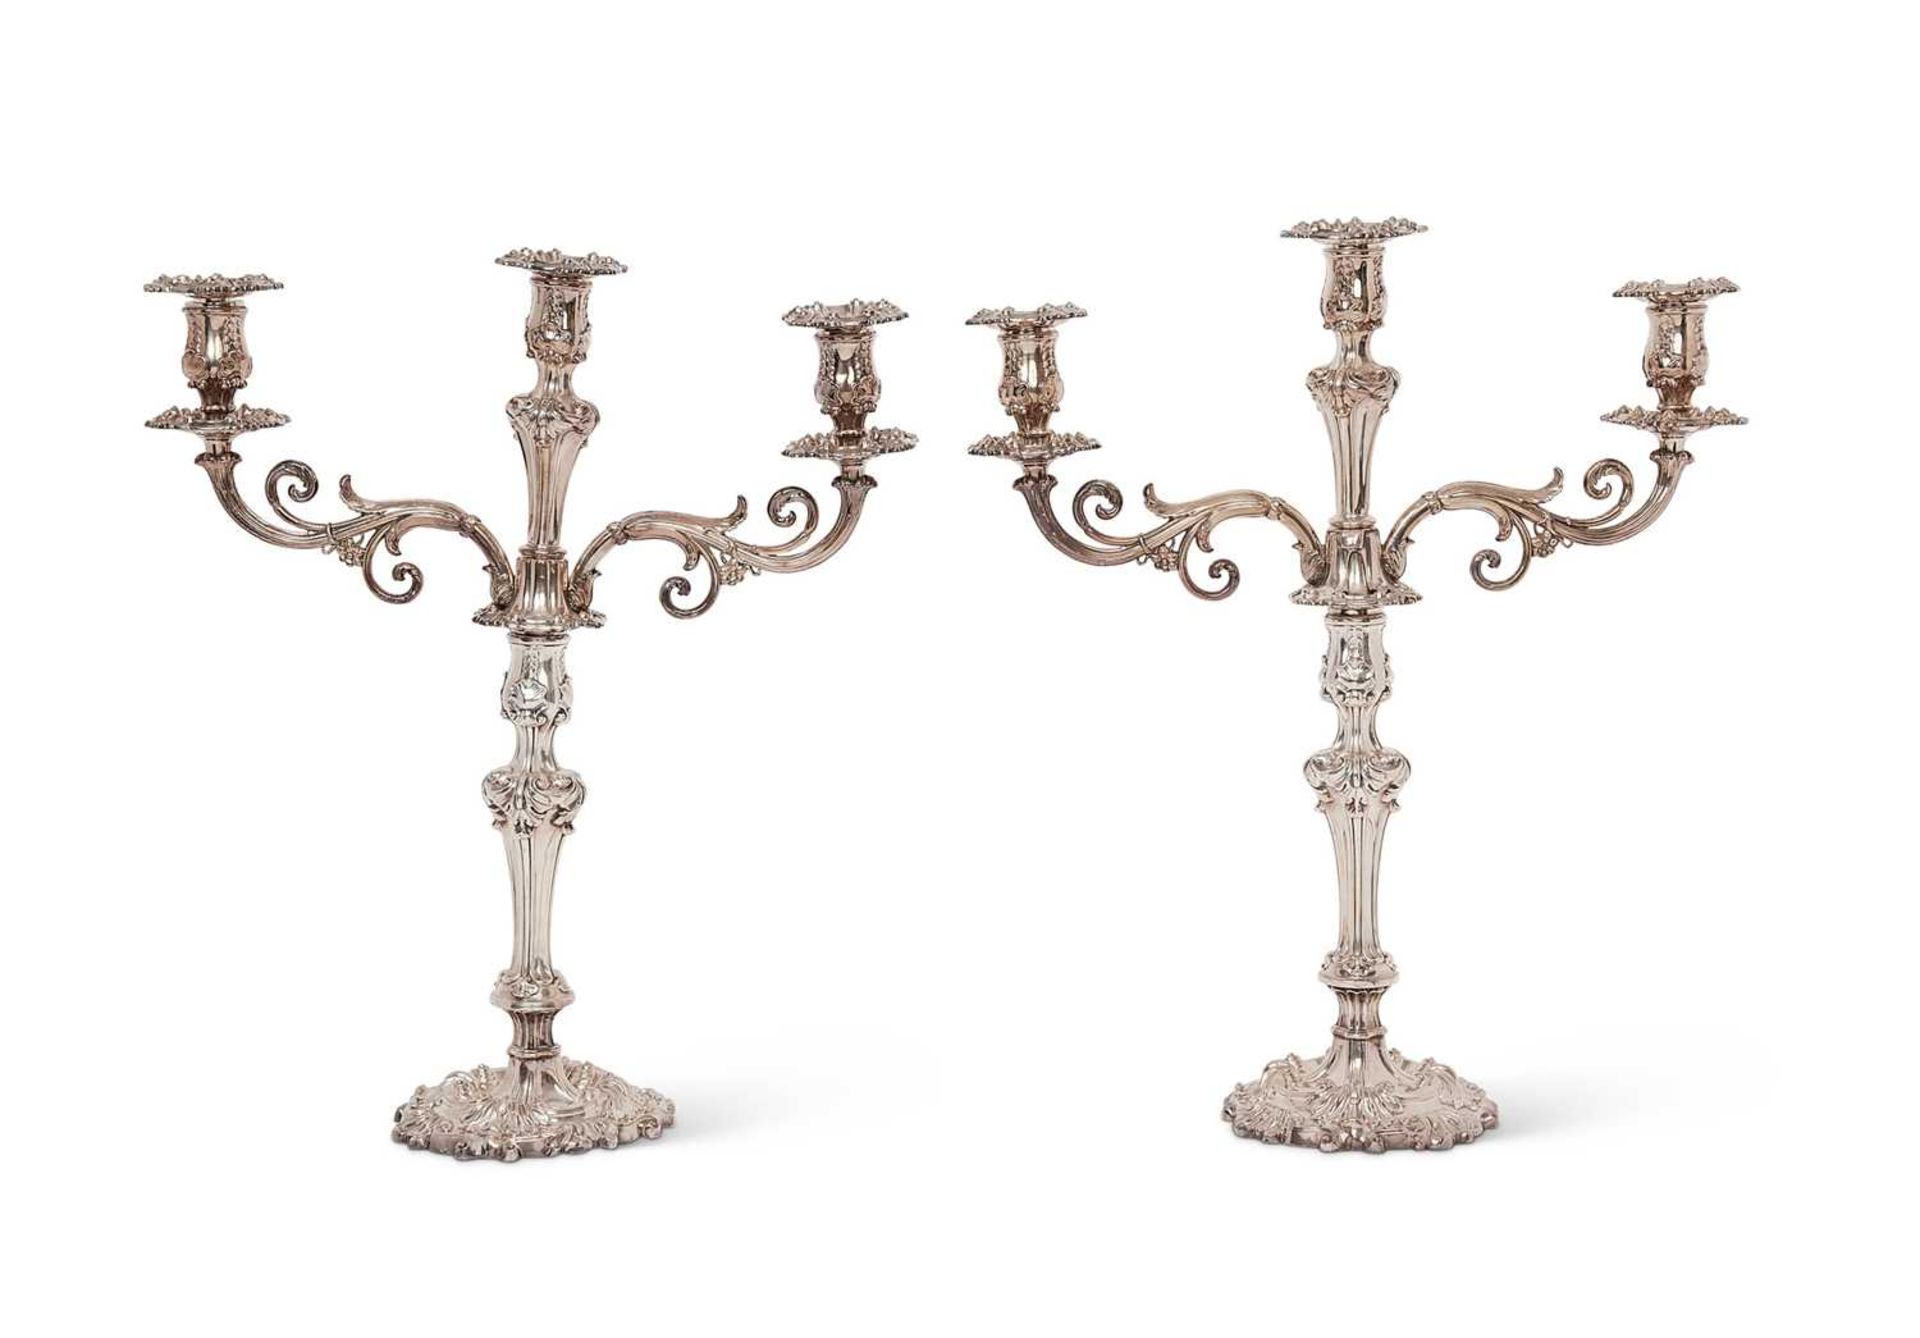 A PAIR OF EARLY 19TH CENTURY OLD SHEFFIELD PLATE CANDELABRA AFTER THE DESIGN BY PAUL STORR